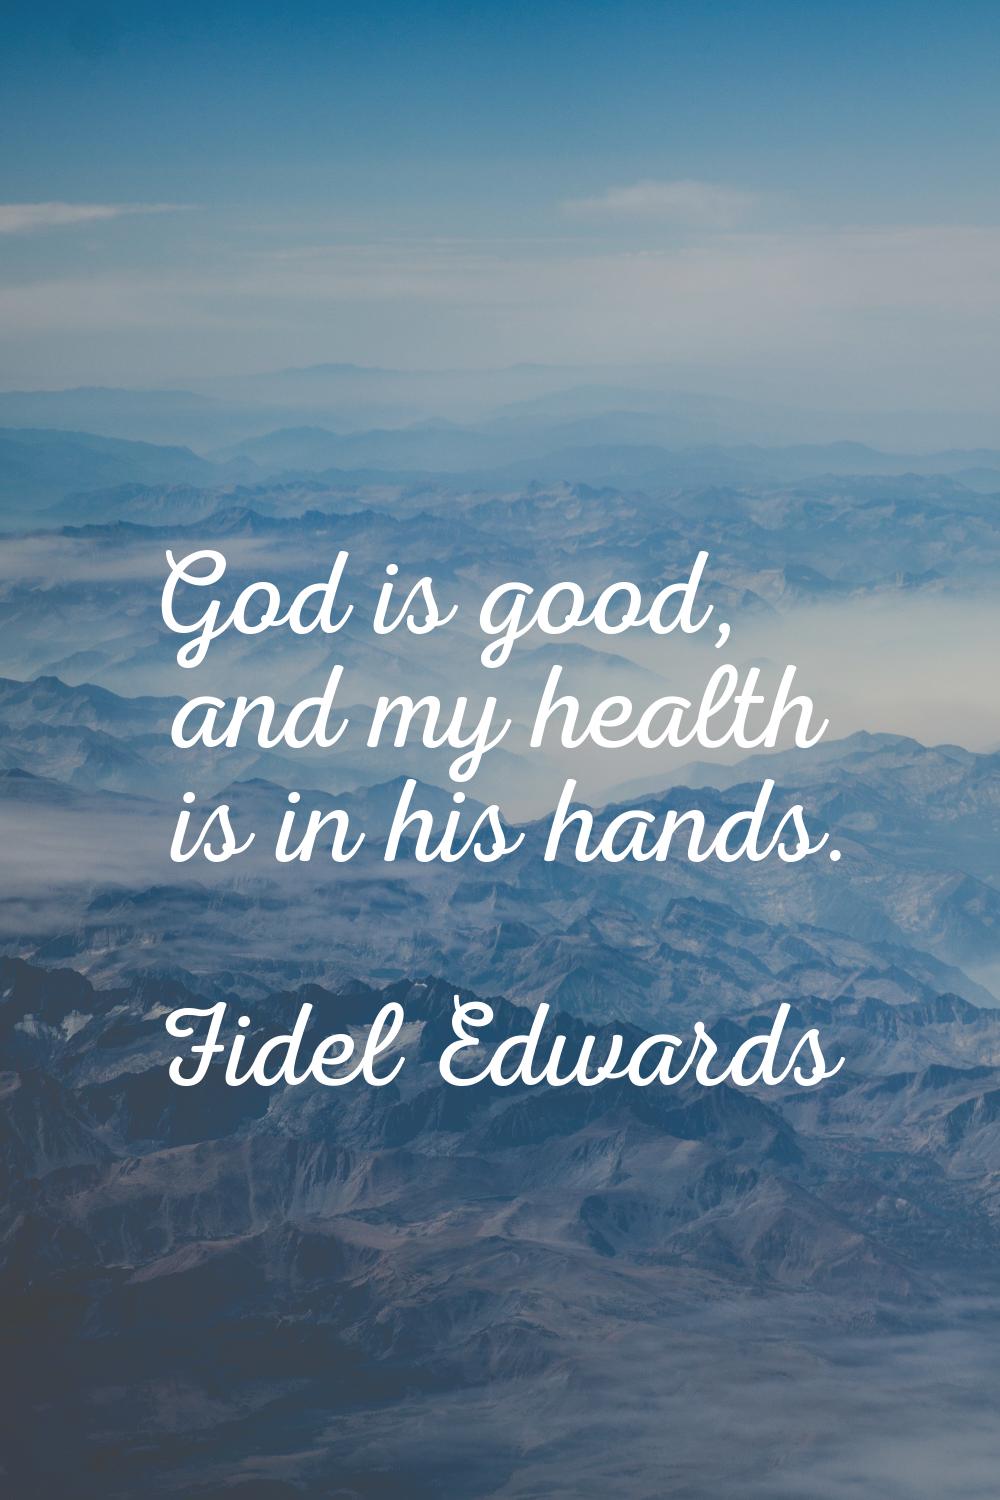 God is good, and my health is in his hands.